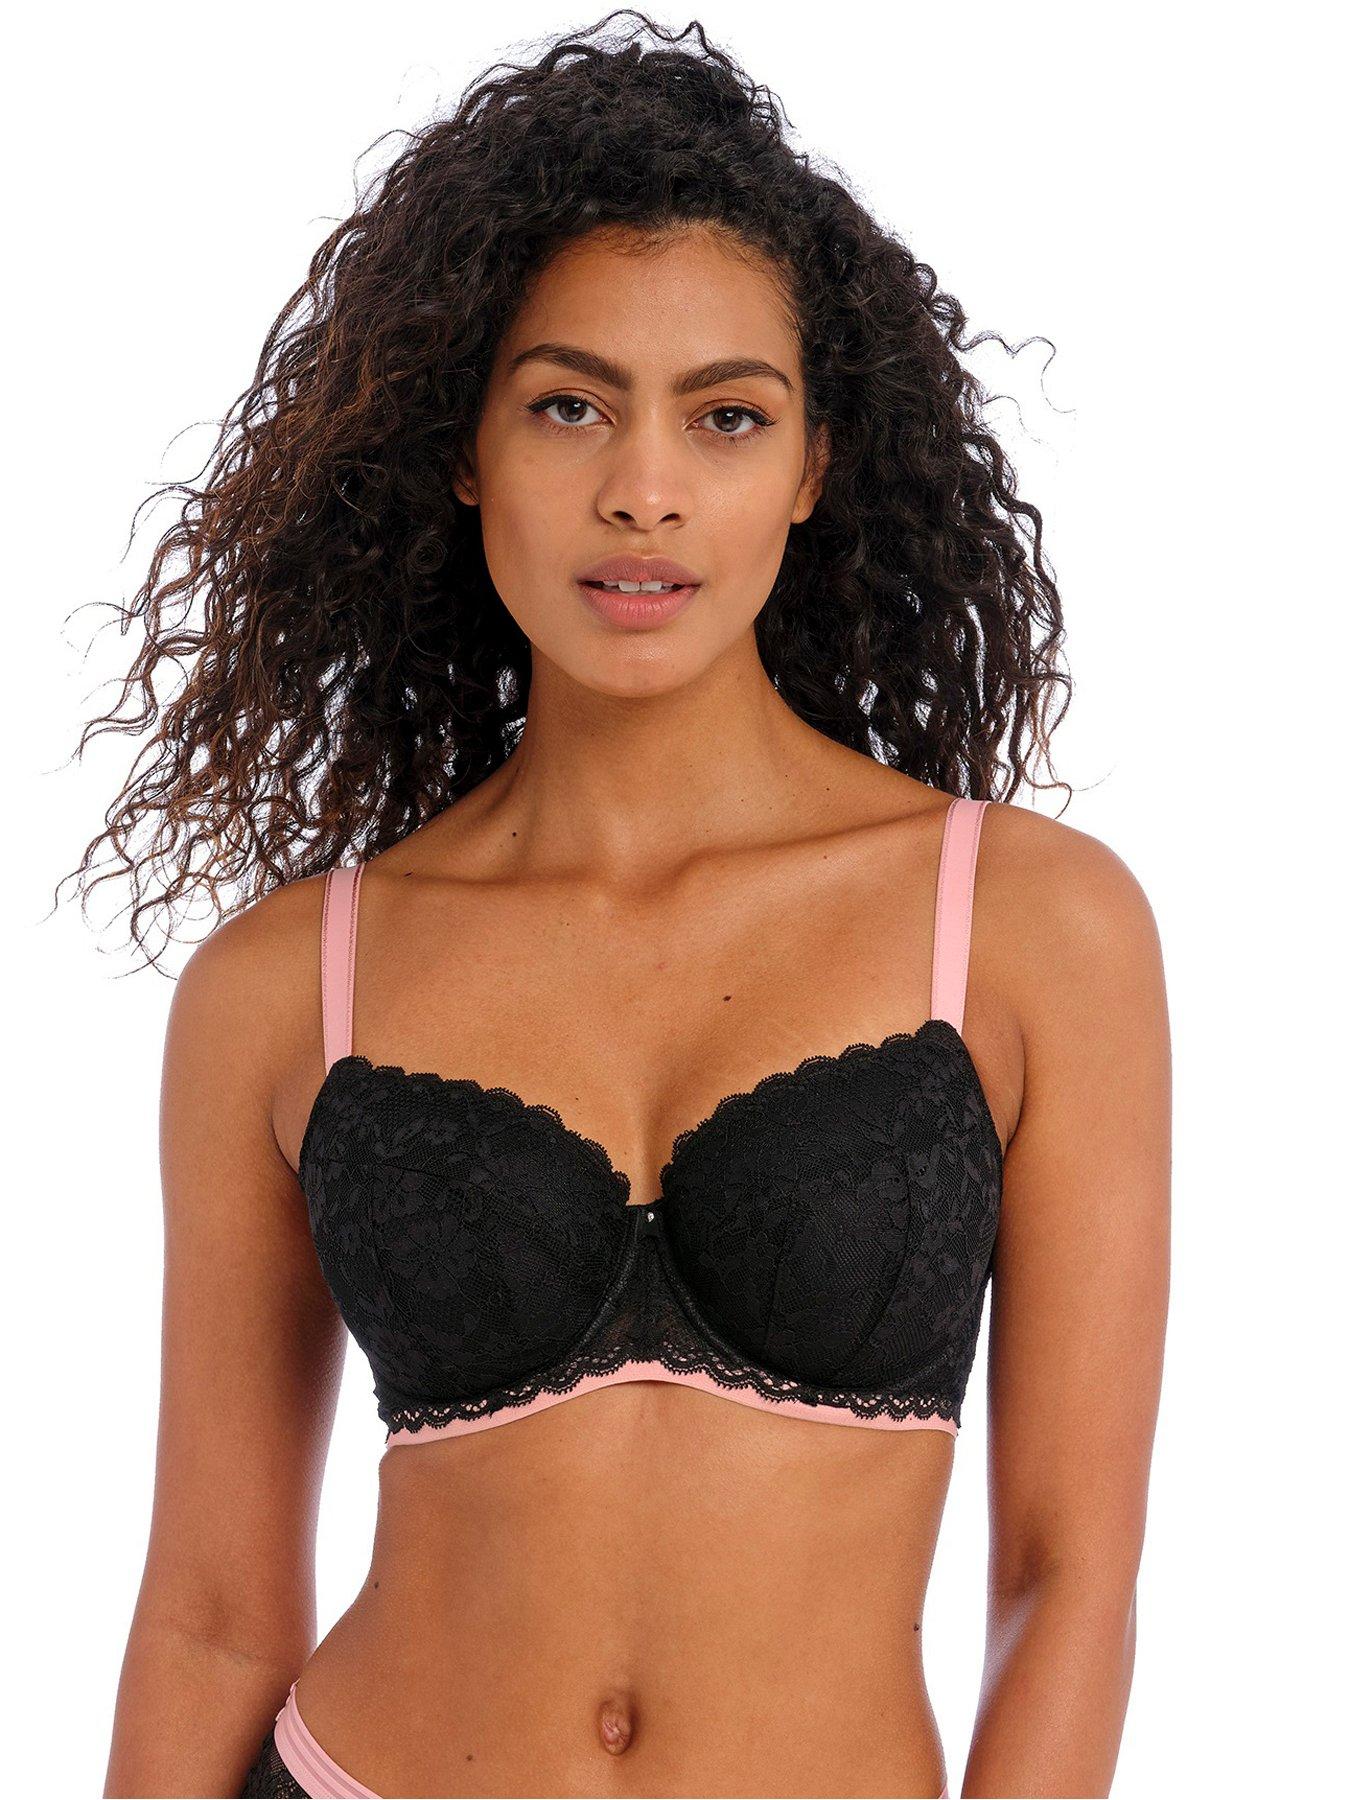 Buy DD+ Floral & Nude Full Cup Underwired Bra 2 Pack 36DD